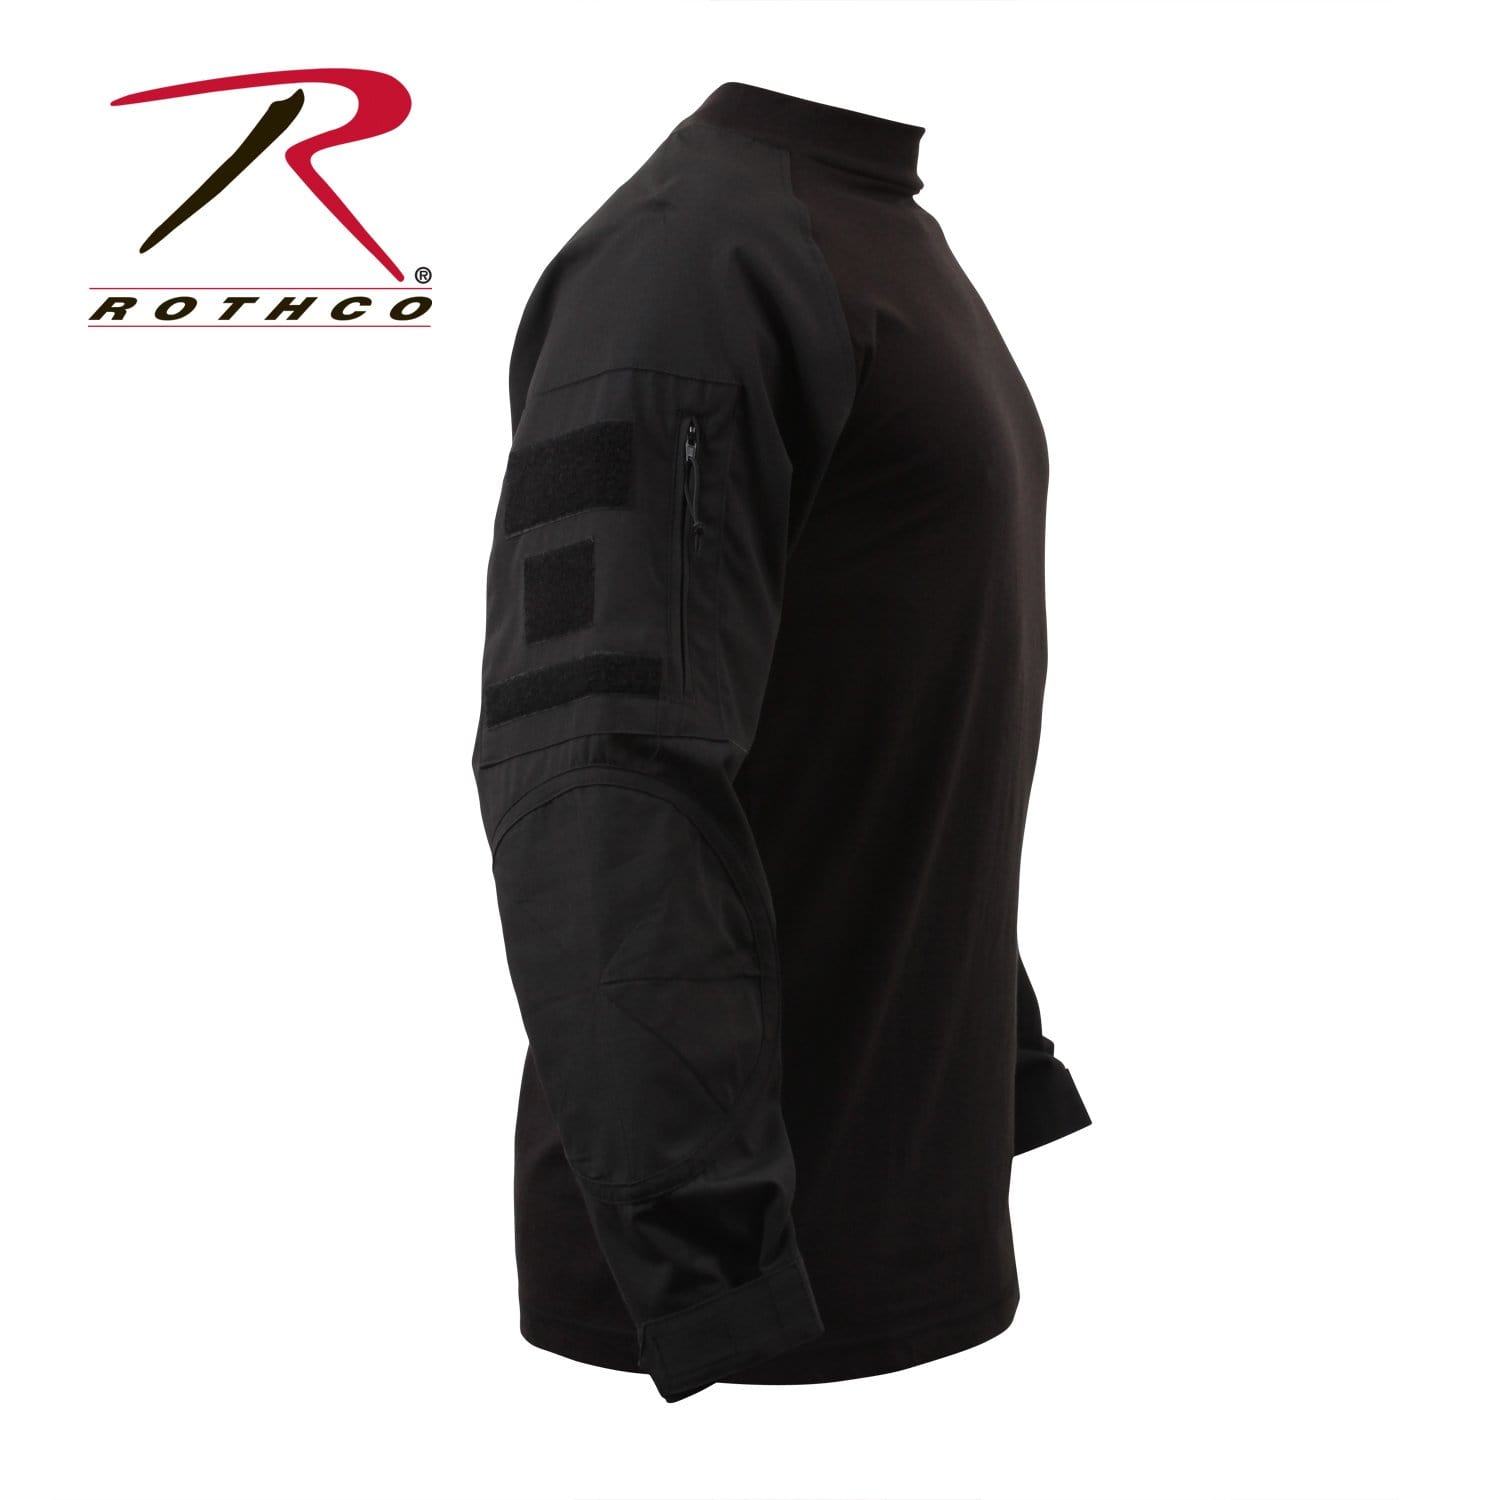 Rothco Military Combat Shirt- Black - Eminent Paintball And Airsoft